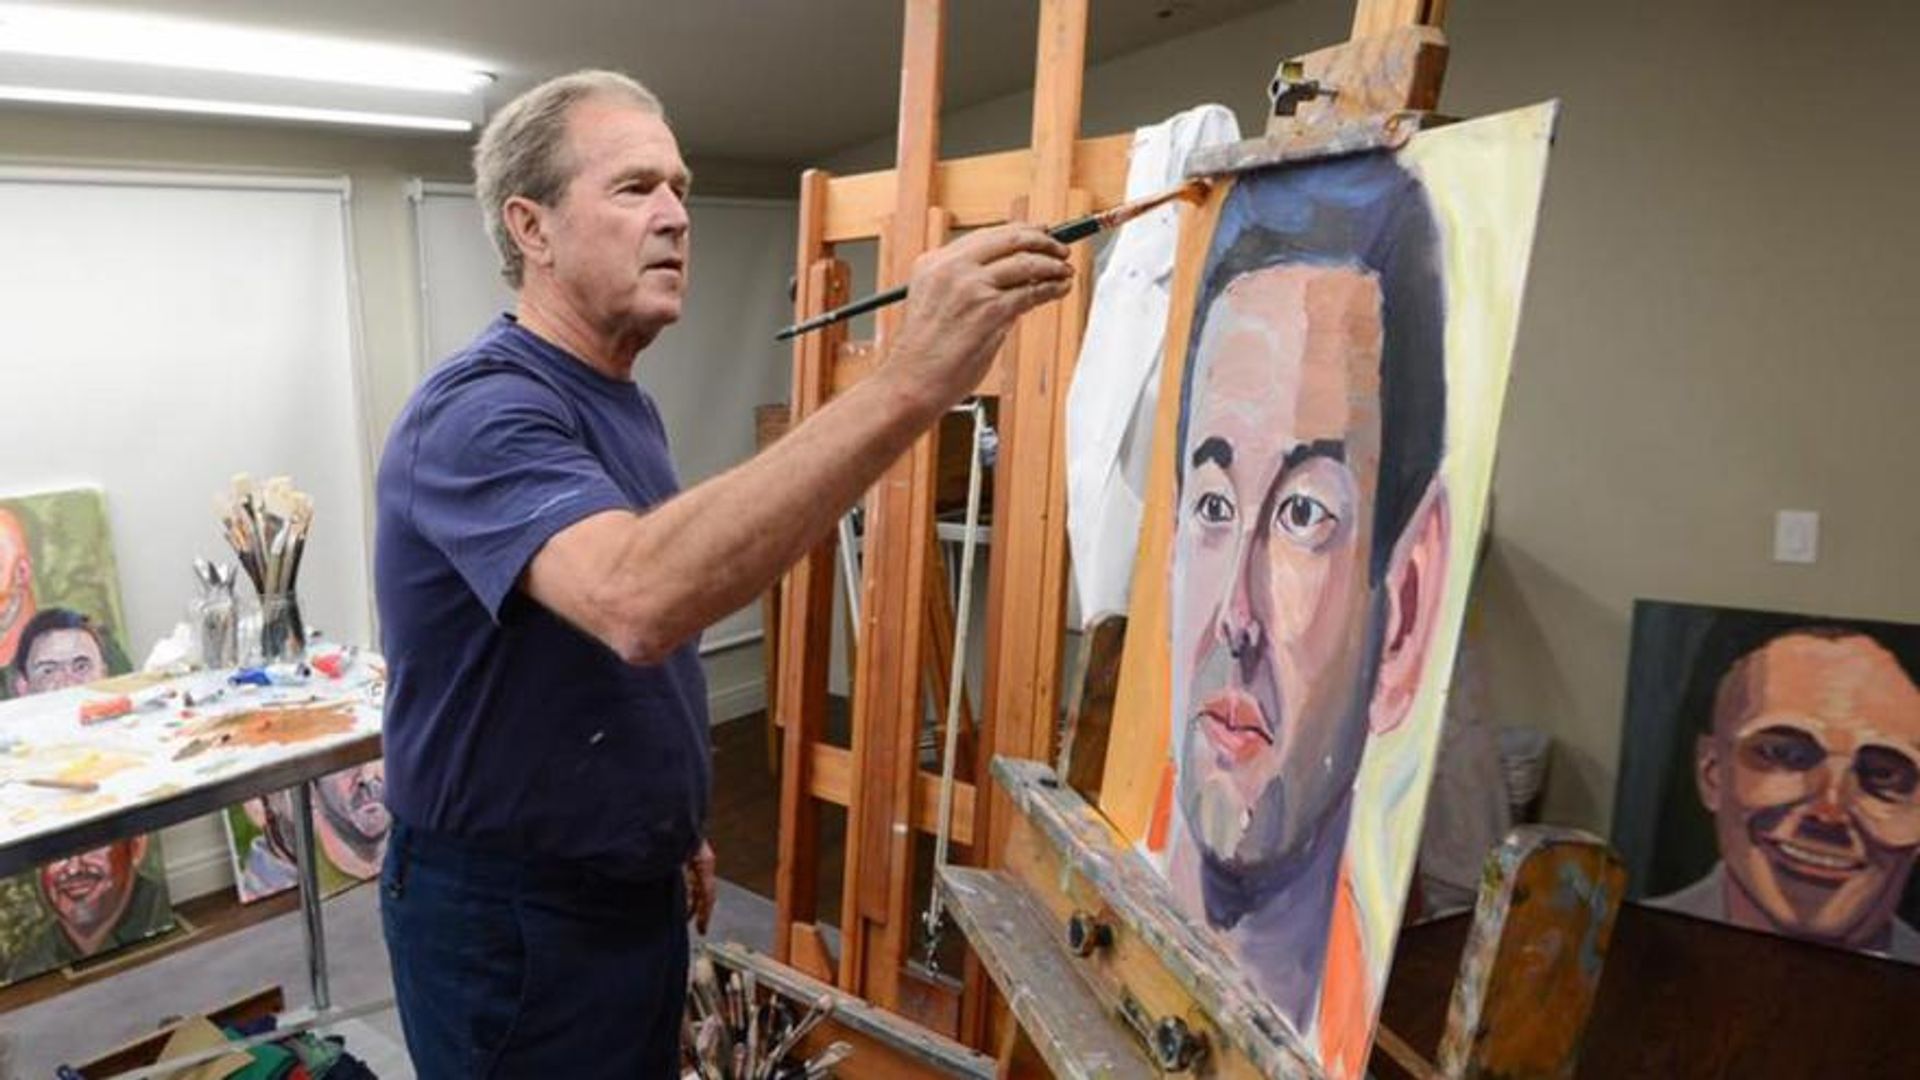 The former president will release a book of 43 portraits of immigrants in conjunction with an exhibition on the value of American immigration at the George W. Bush Presidential Center 